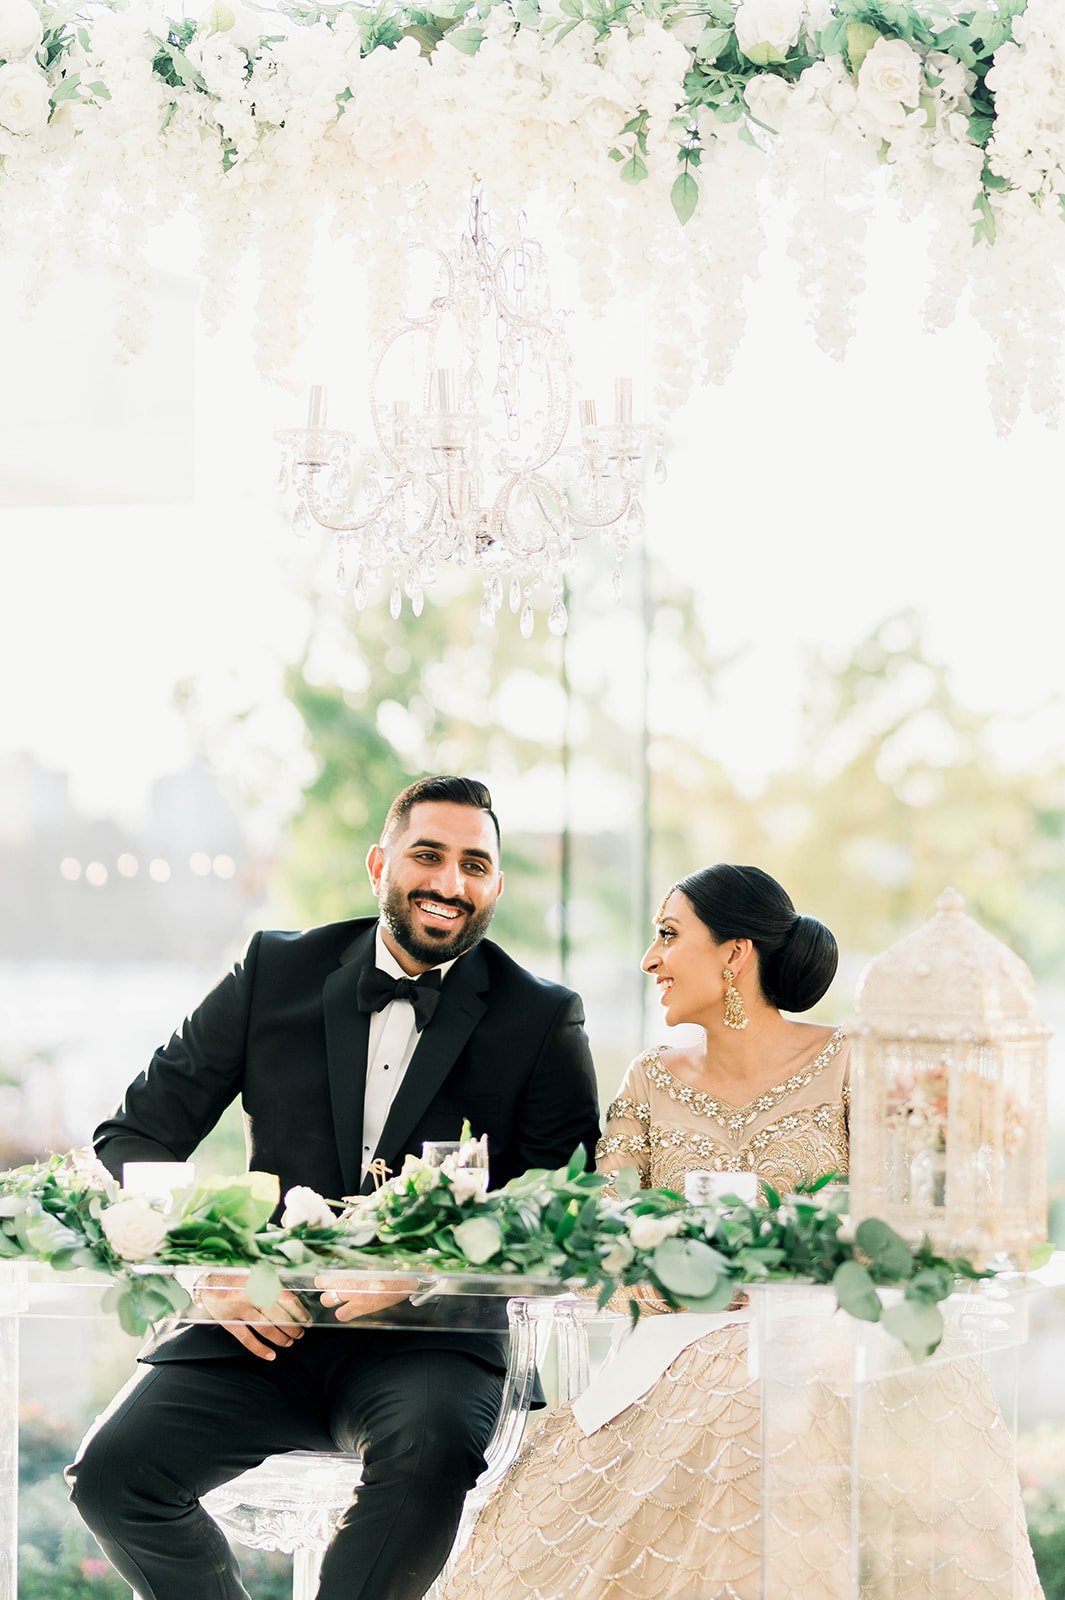 An Indian bride and groom smile and laugh at each other during their reception in Victoria BC